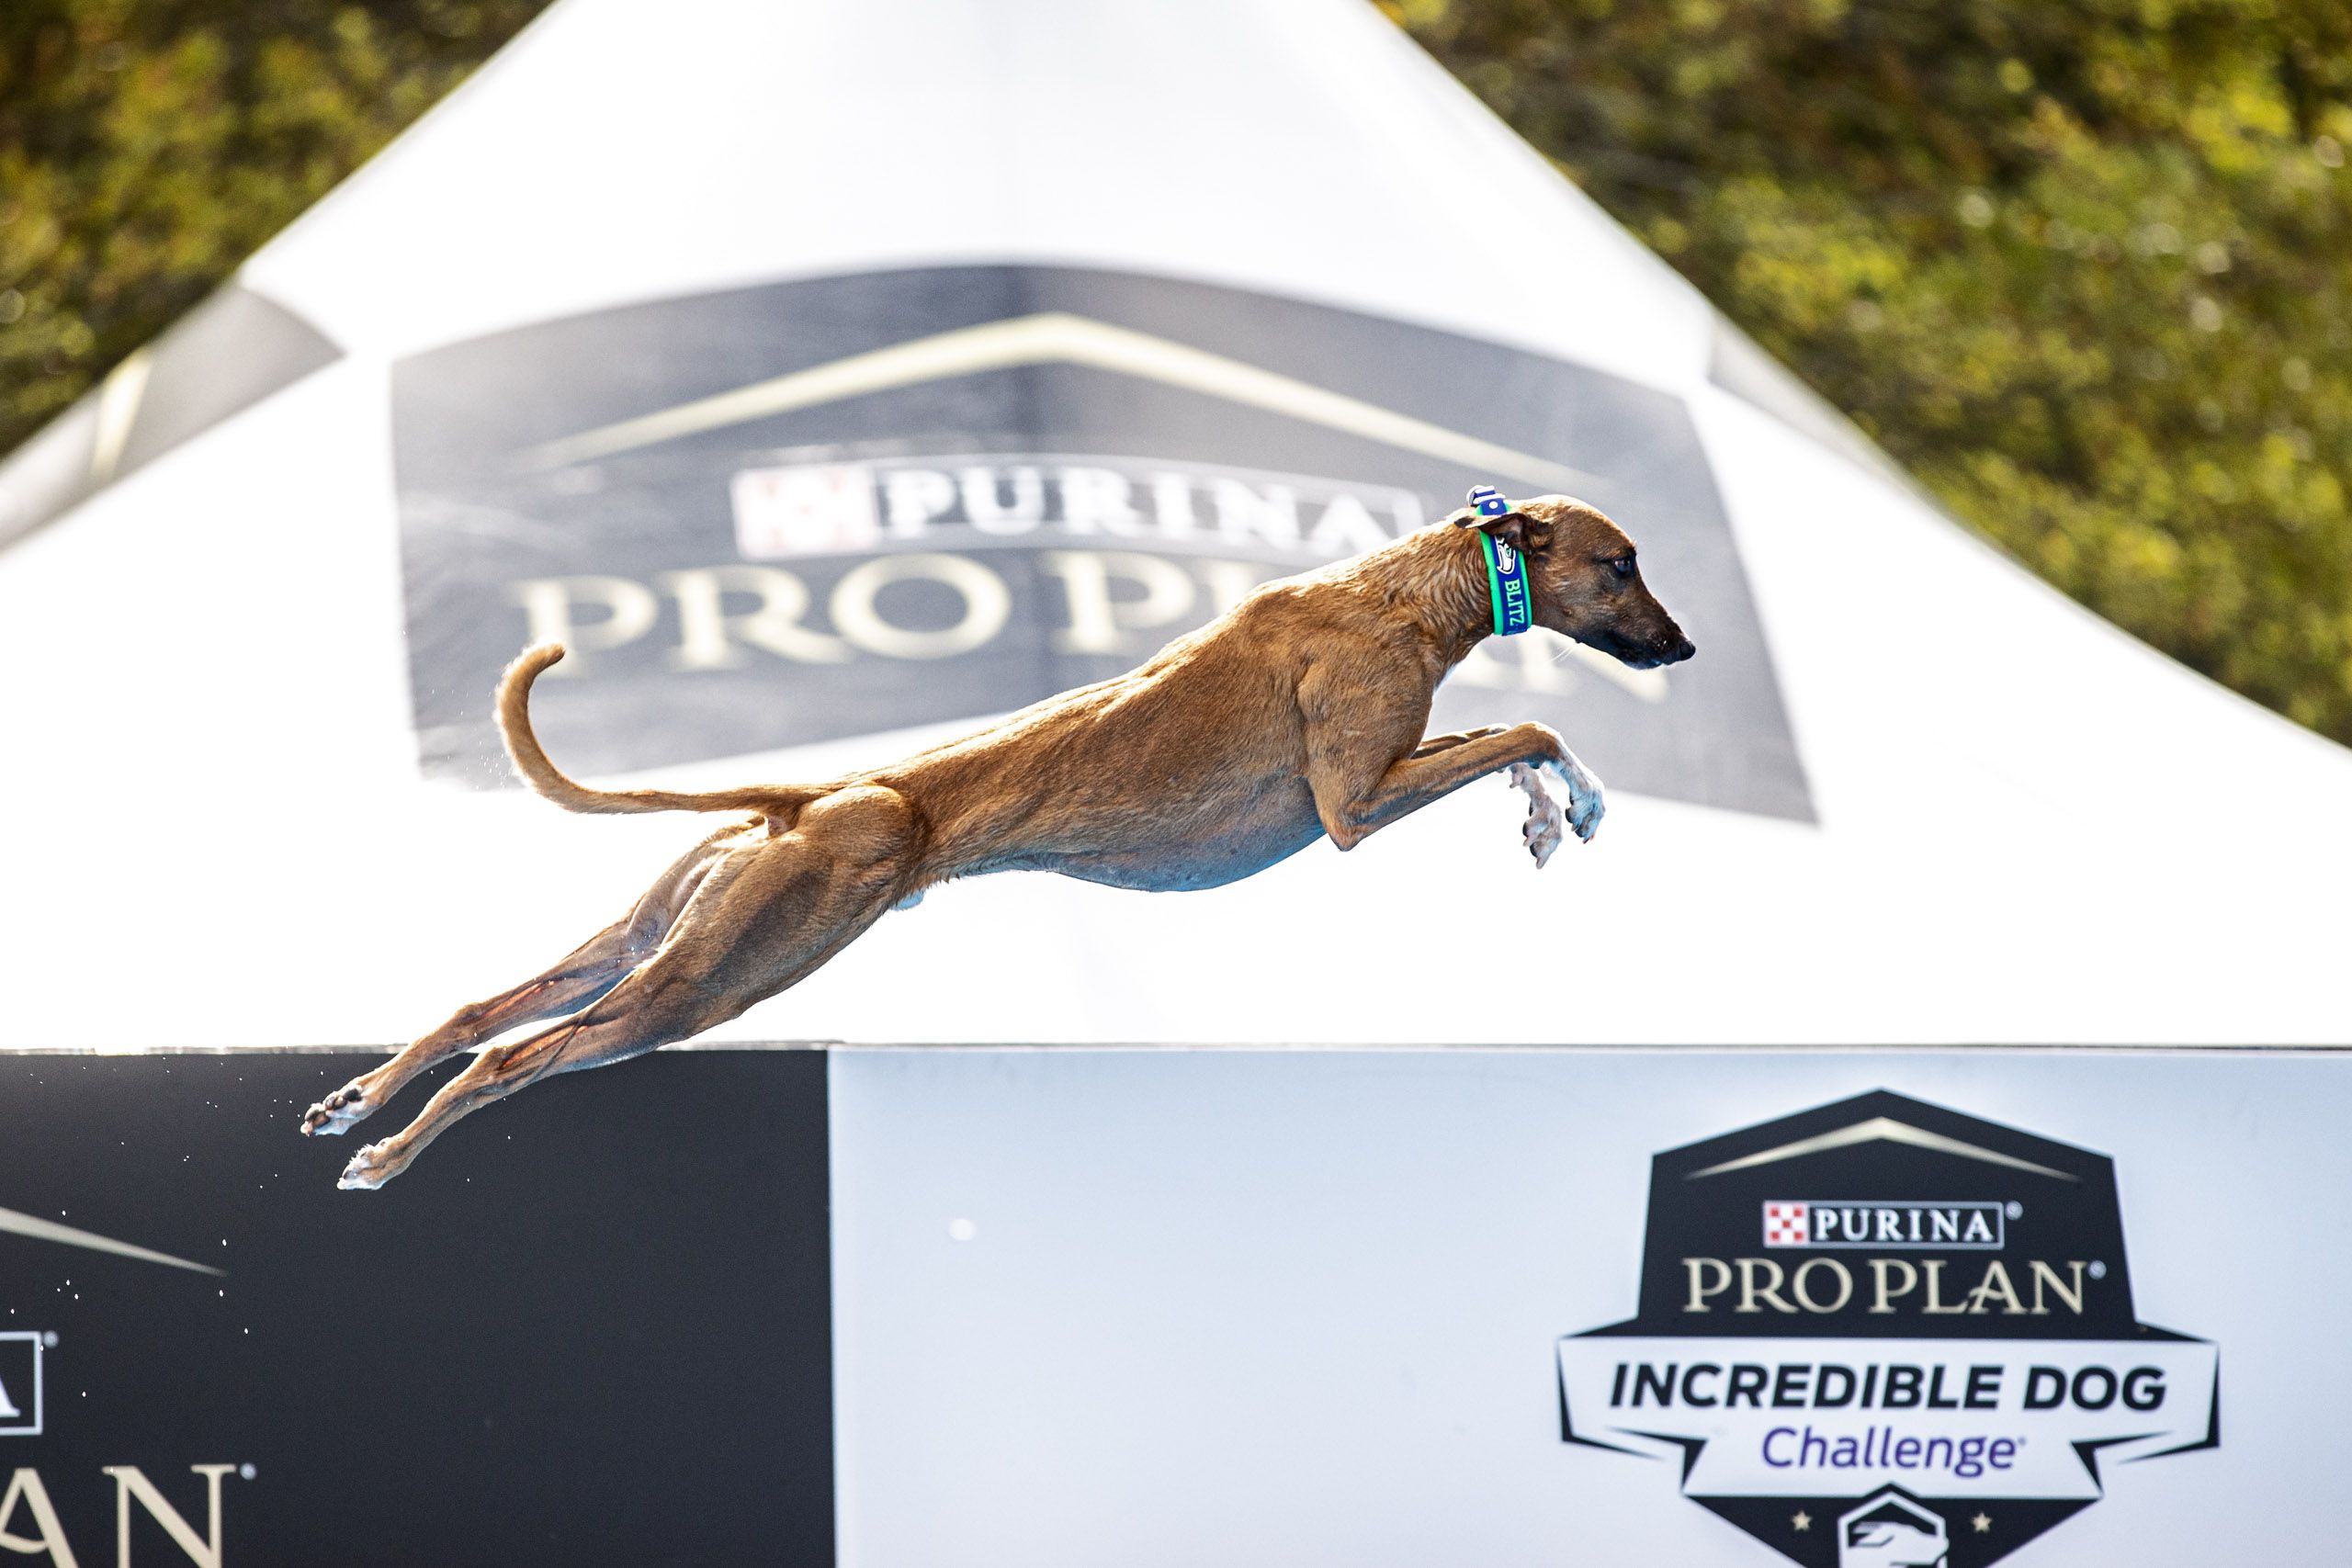 Dog Leaping at Incredible Dog Challenge